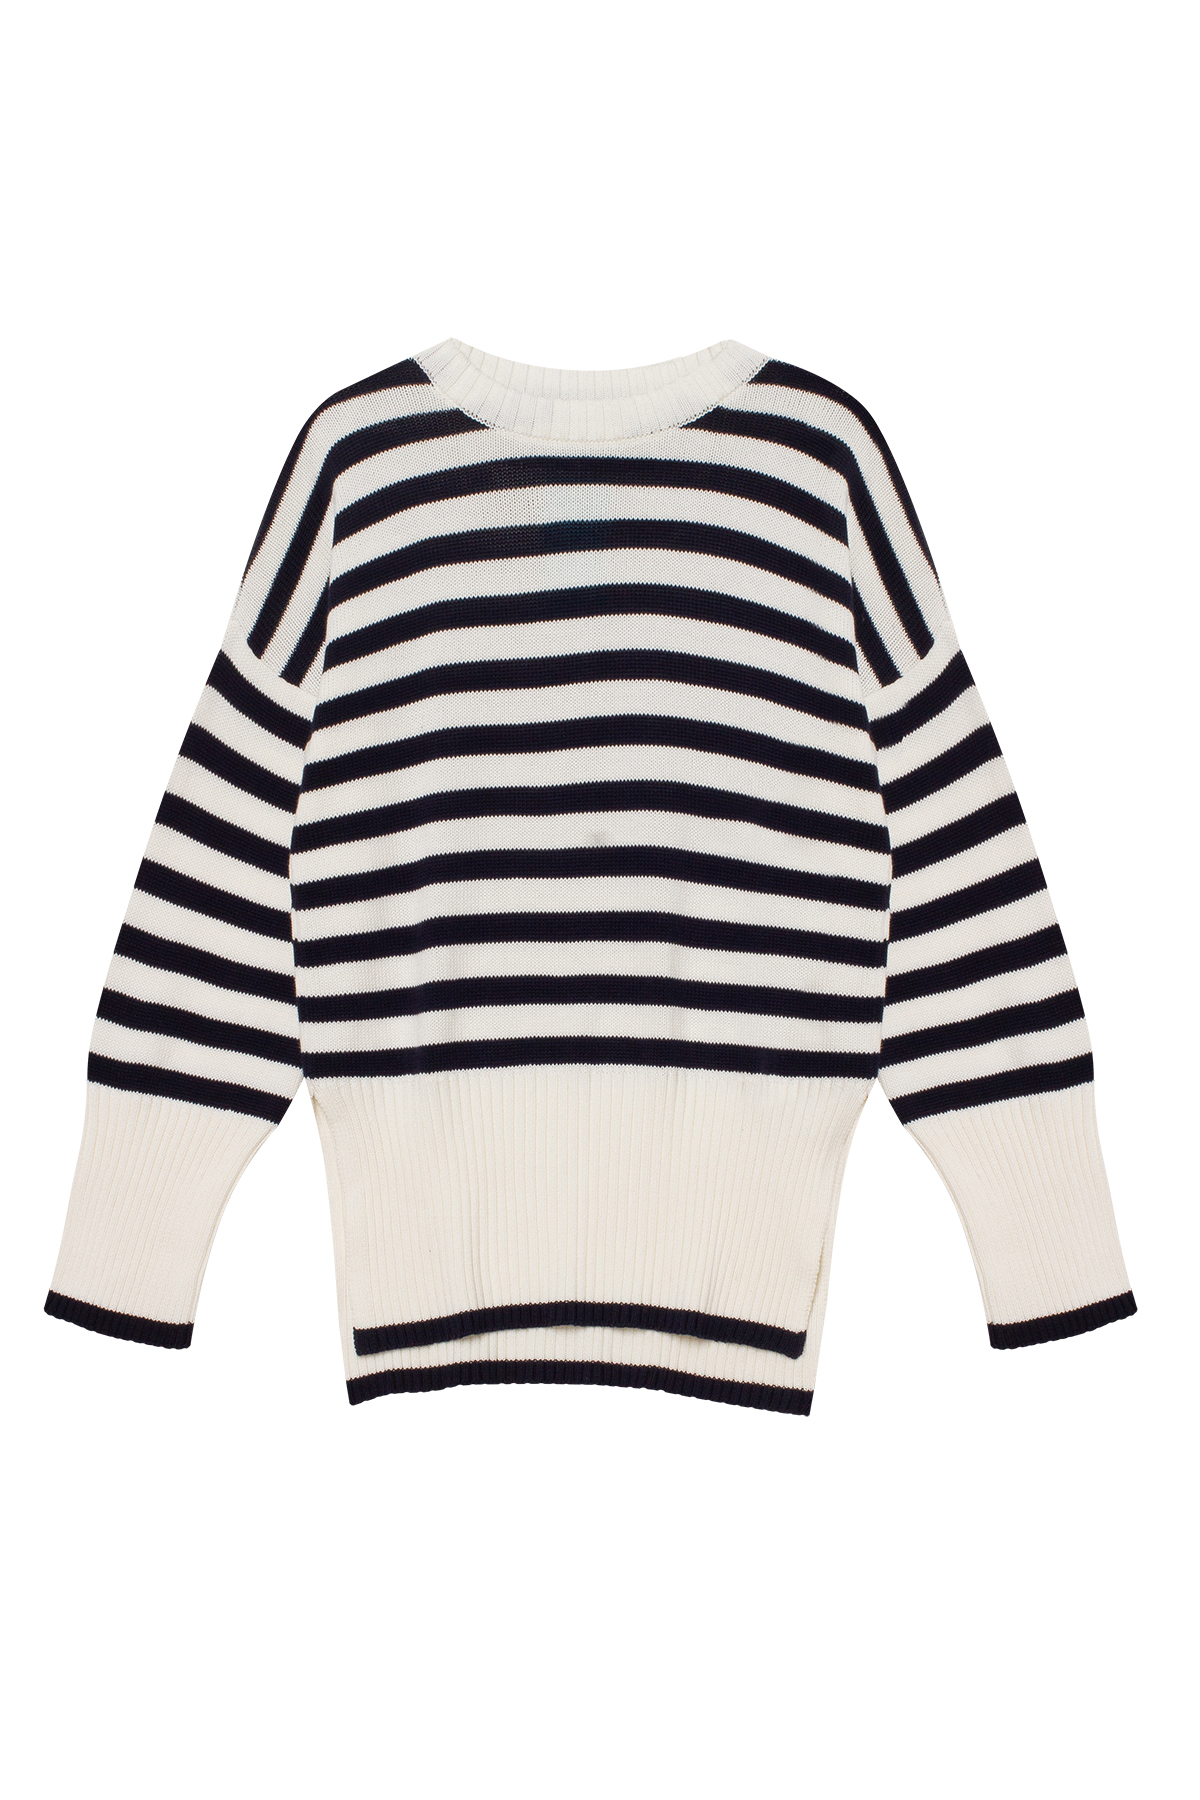 Sweater with milk cotton in blue stripes, photo 6